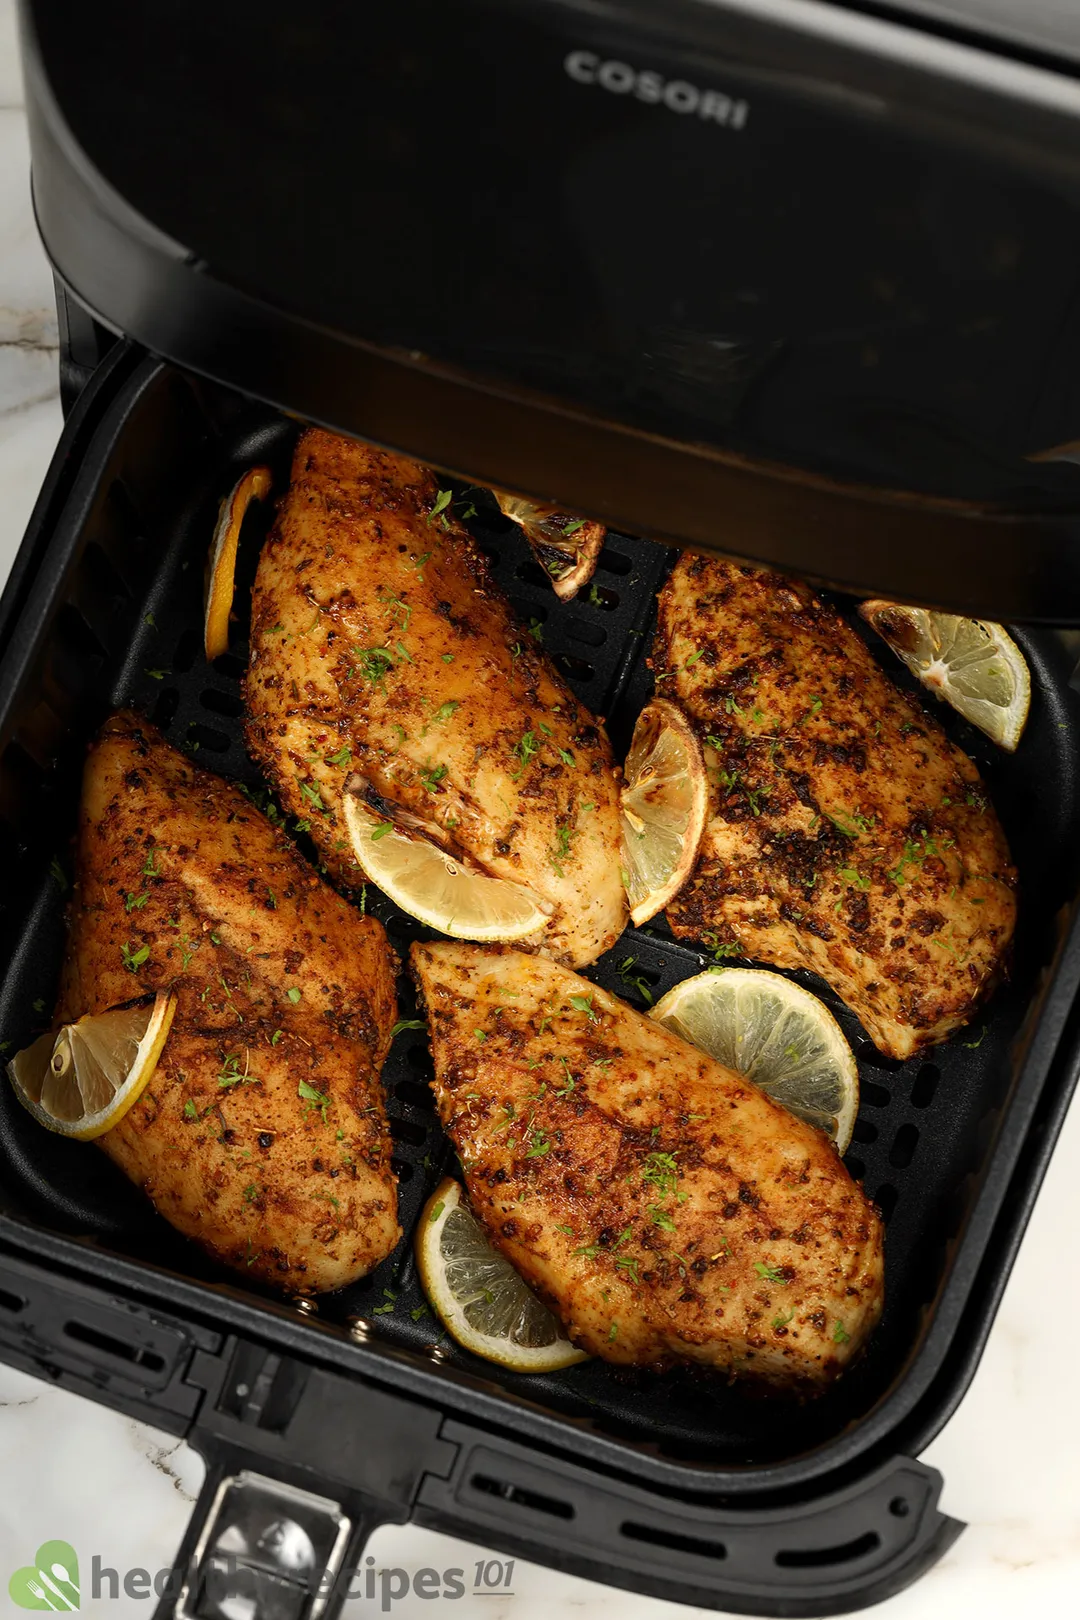 four cooked chicken breasts with lemon slices in an air fryer basket